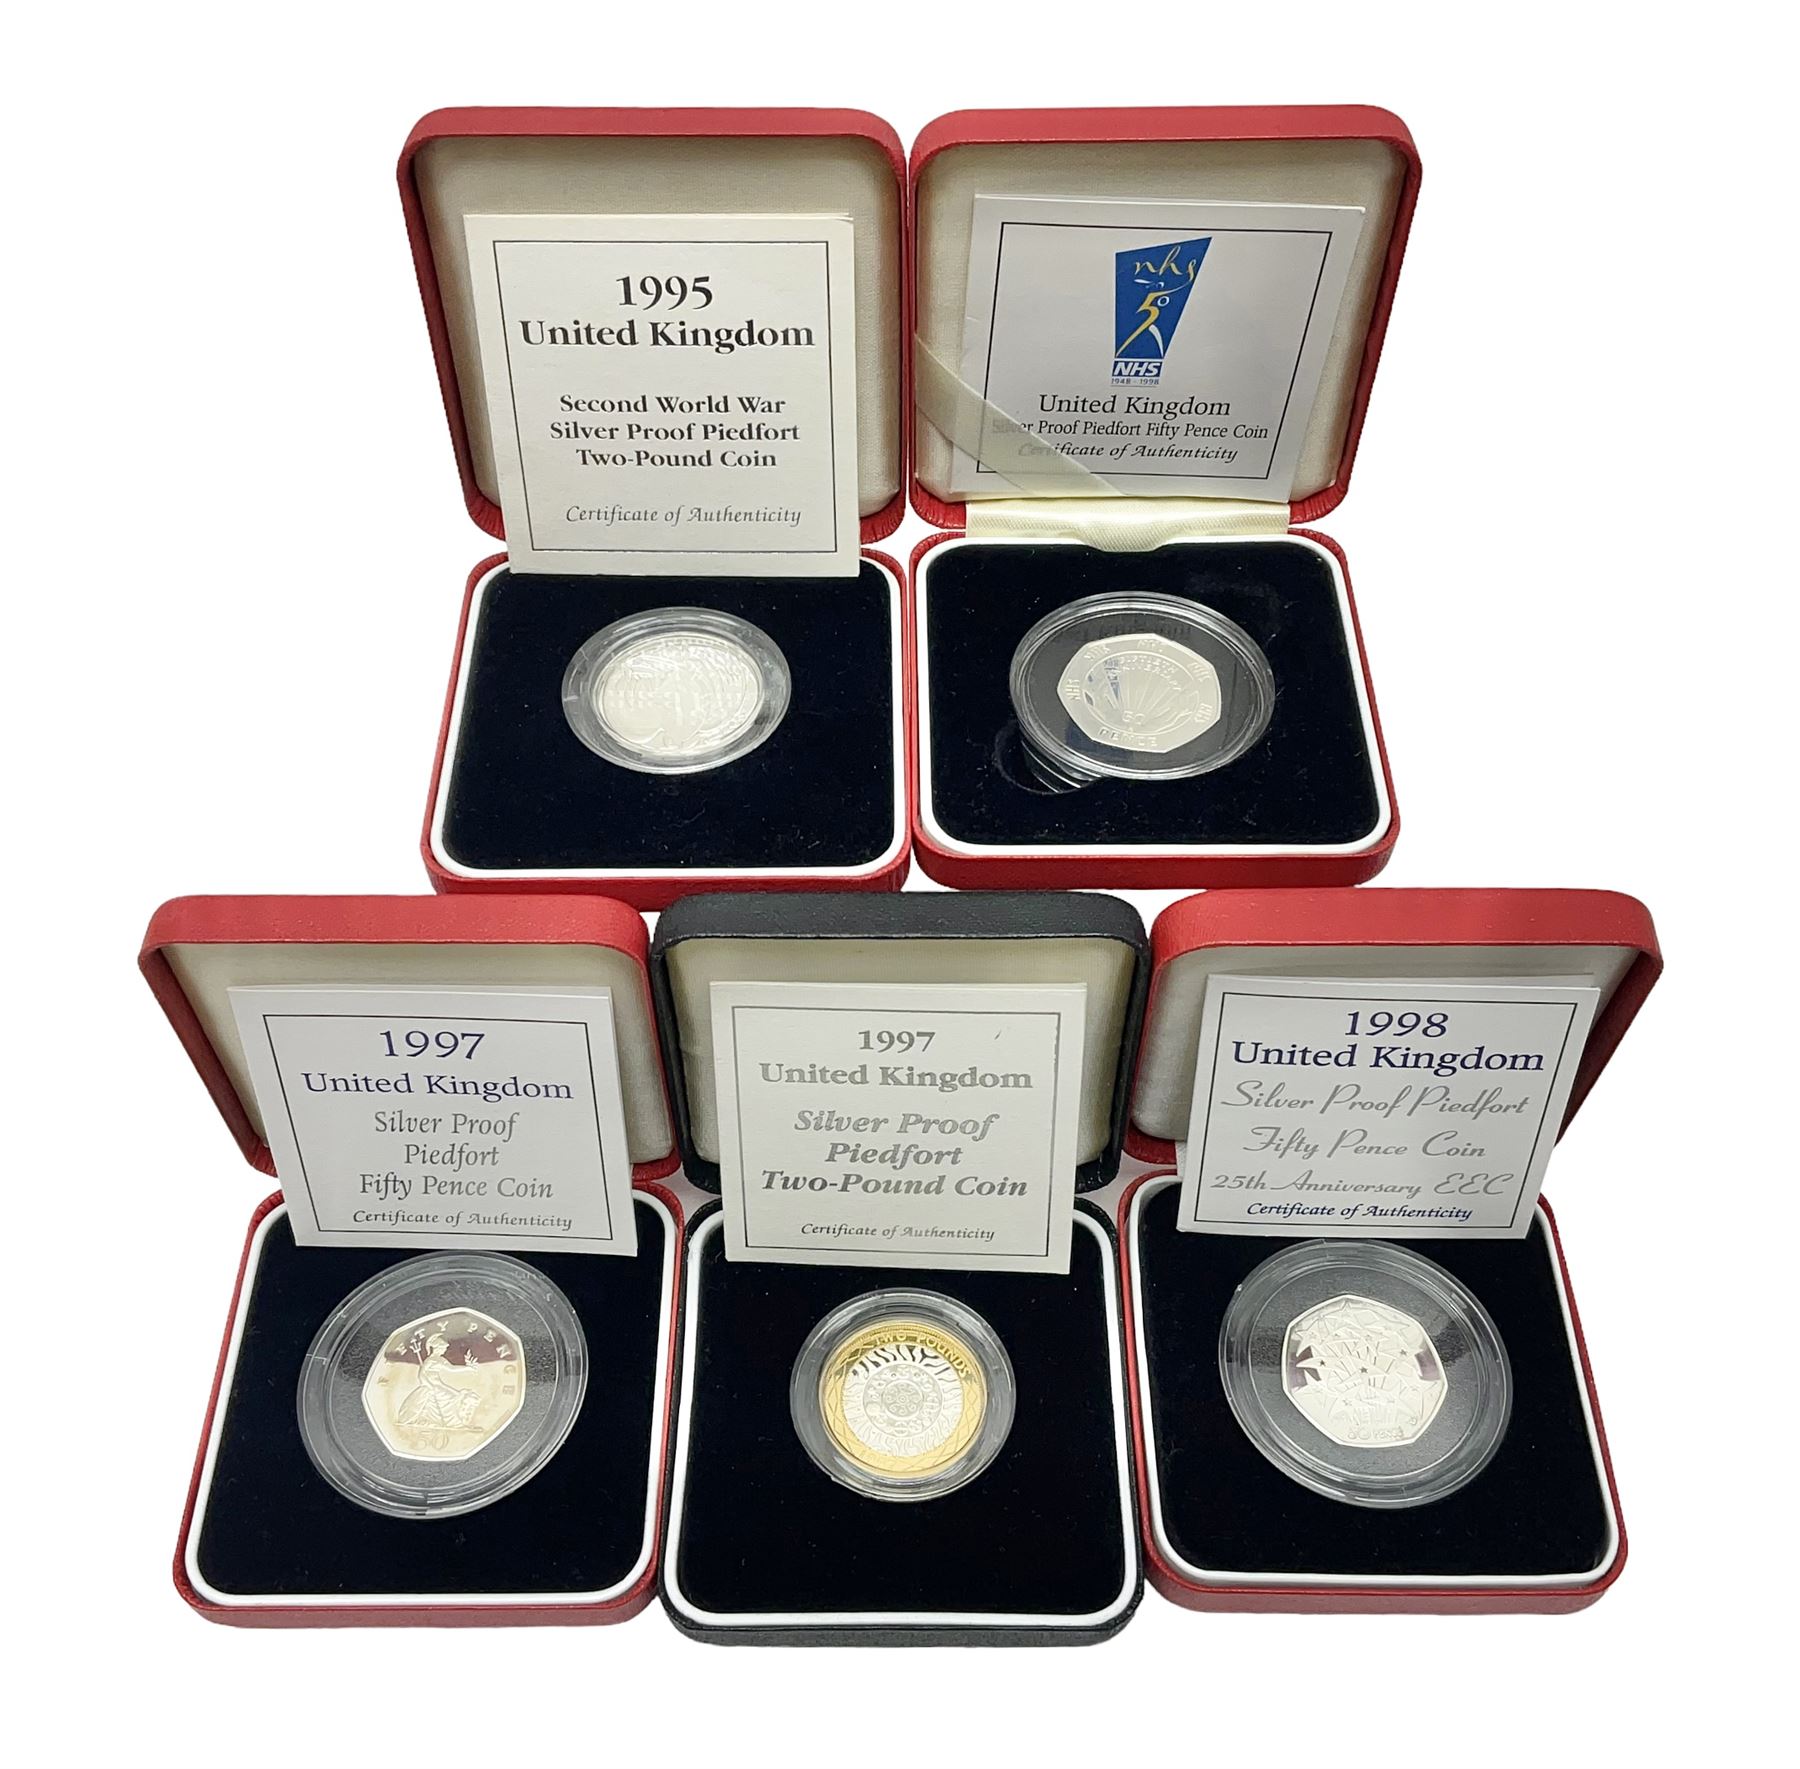 Five The Royal Mint United Kingdom silver proof piedfort coins